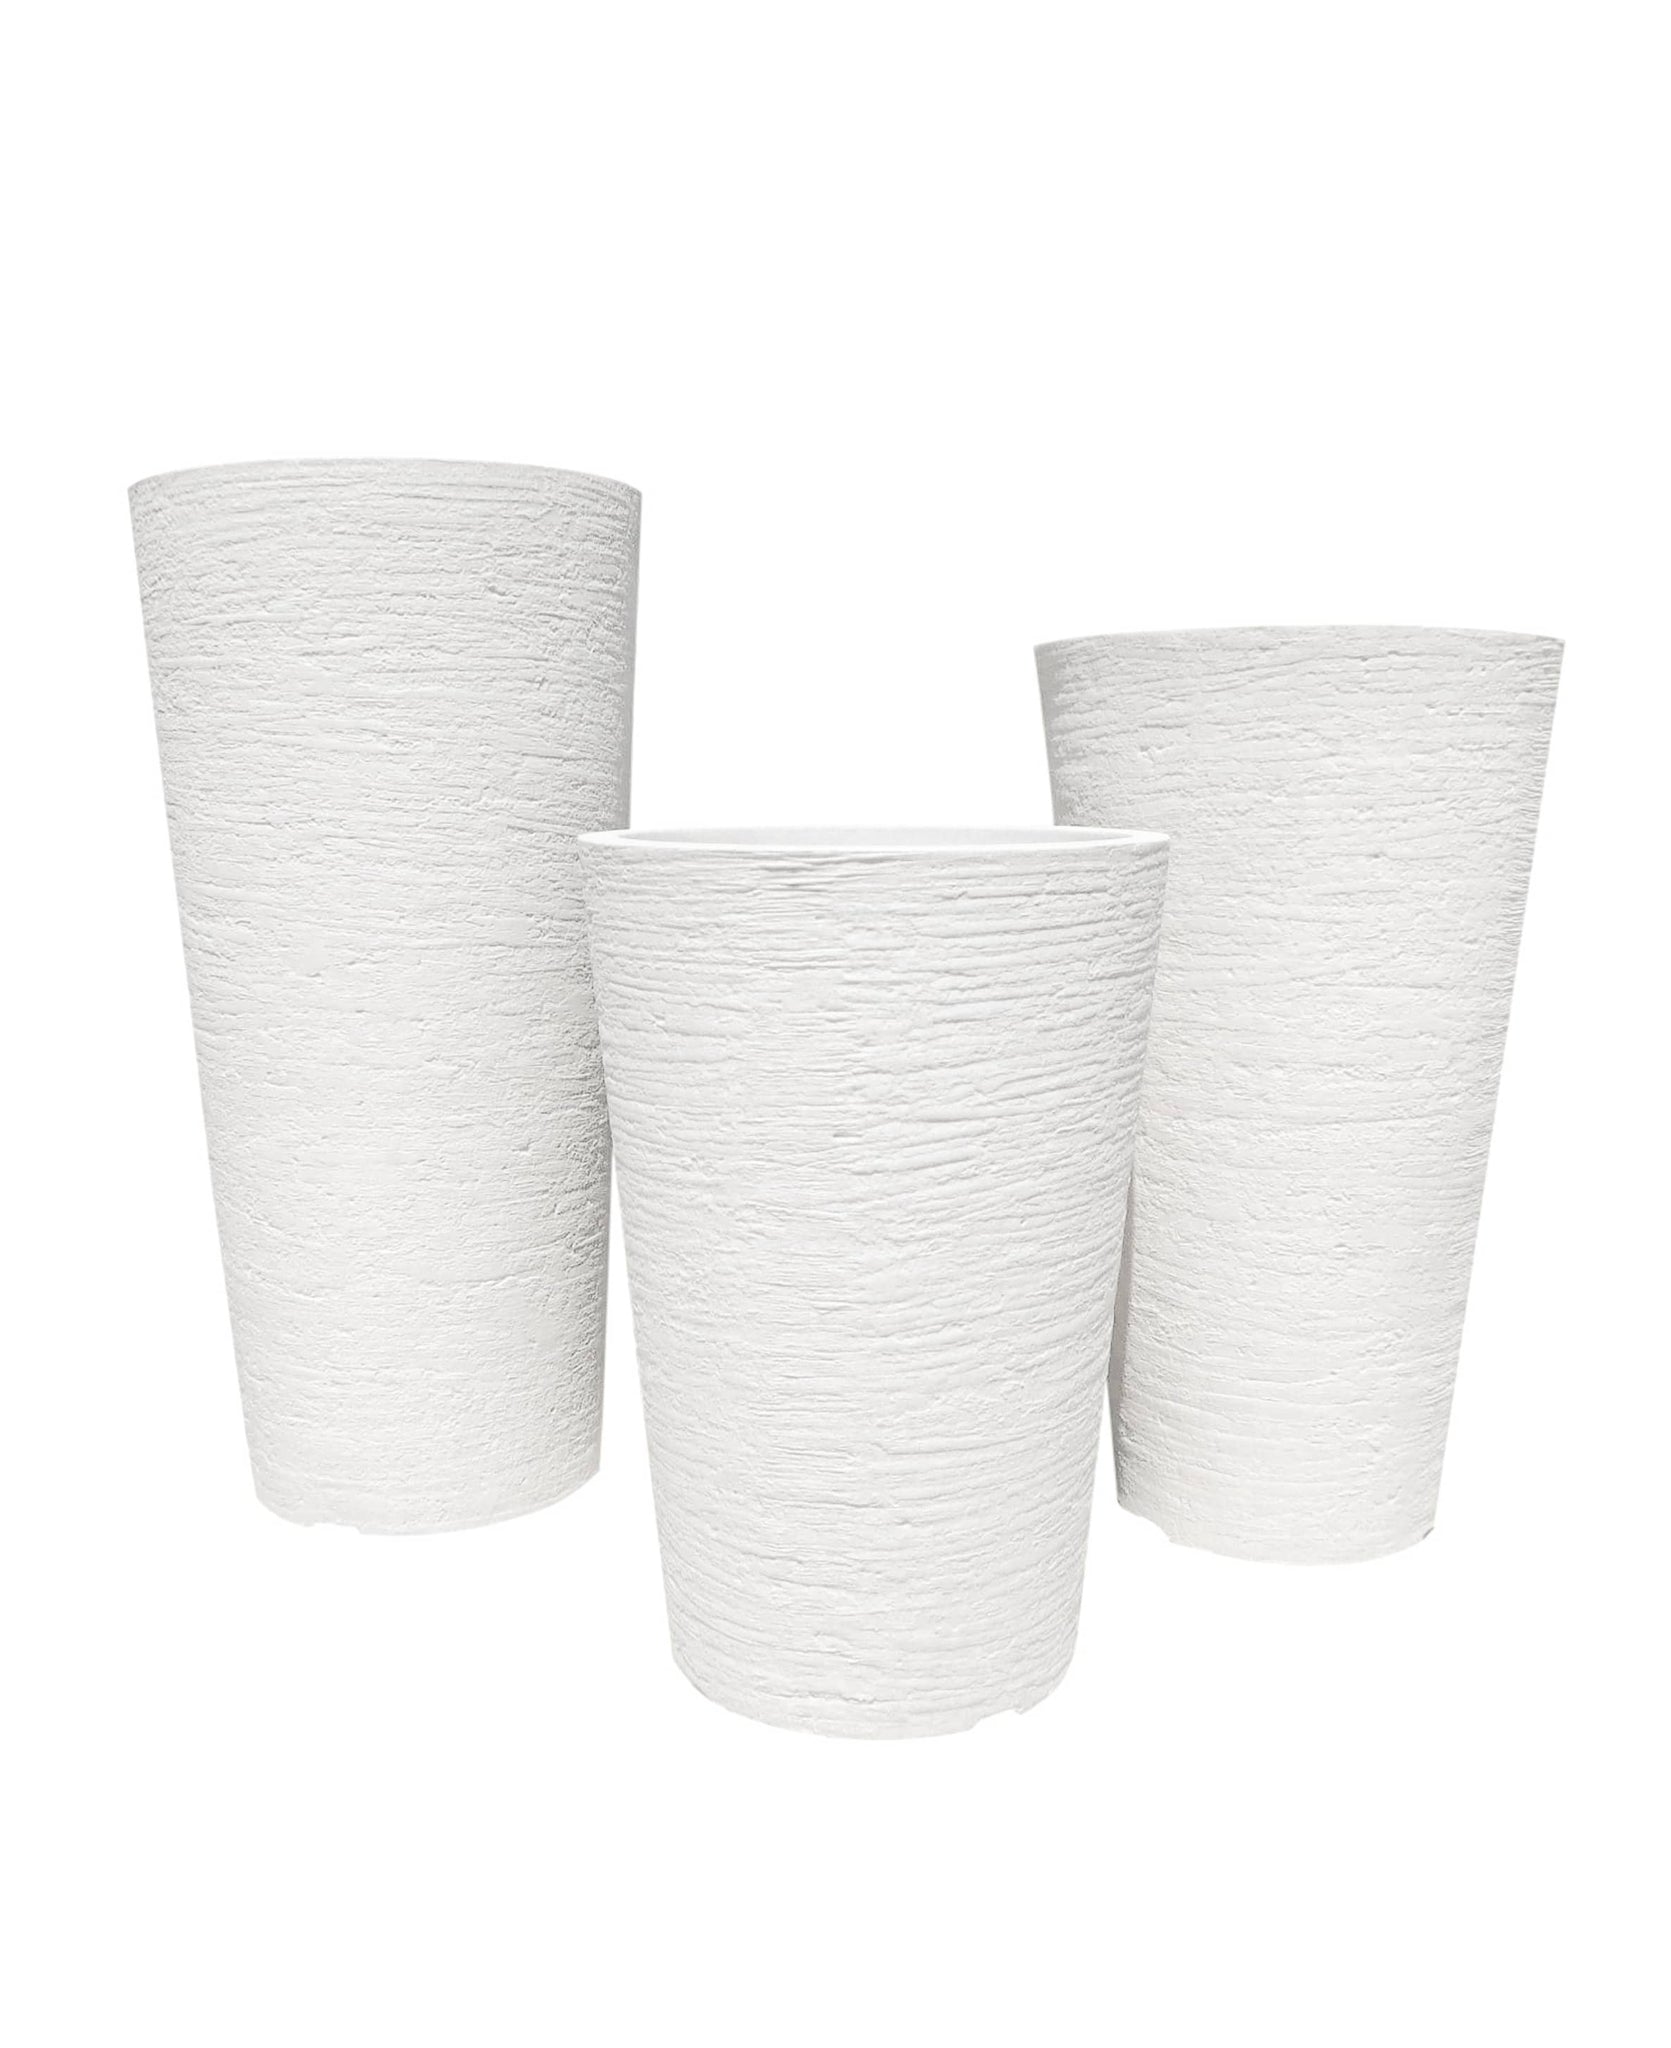 Medium Tall upright slim Modern Planters. Great for the minimalist. Modern apartment living. Great for small spaces. Lightweight. Perfect in Groups or individually displayed. Colour Off white